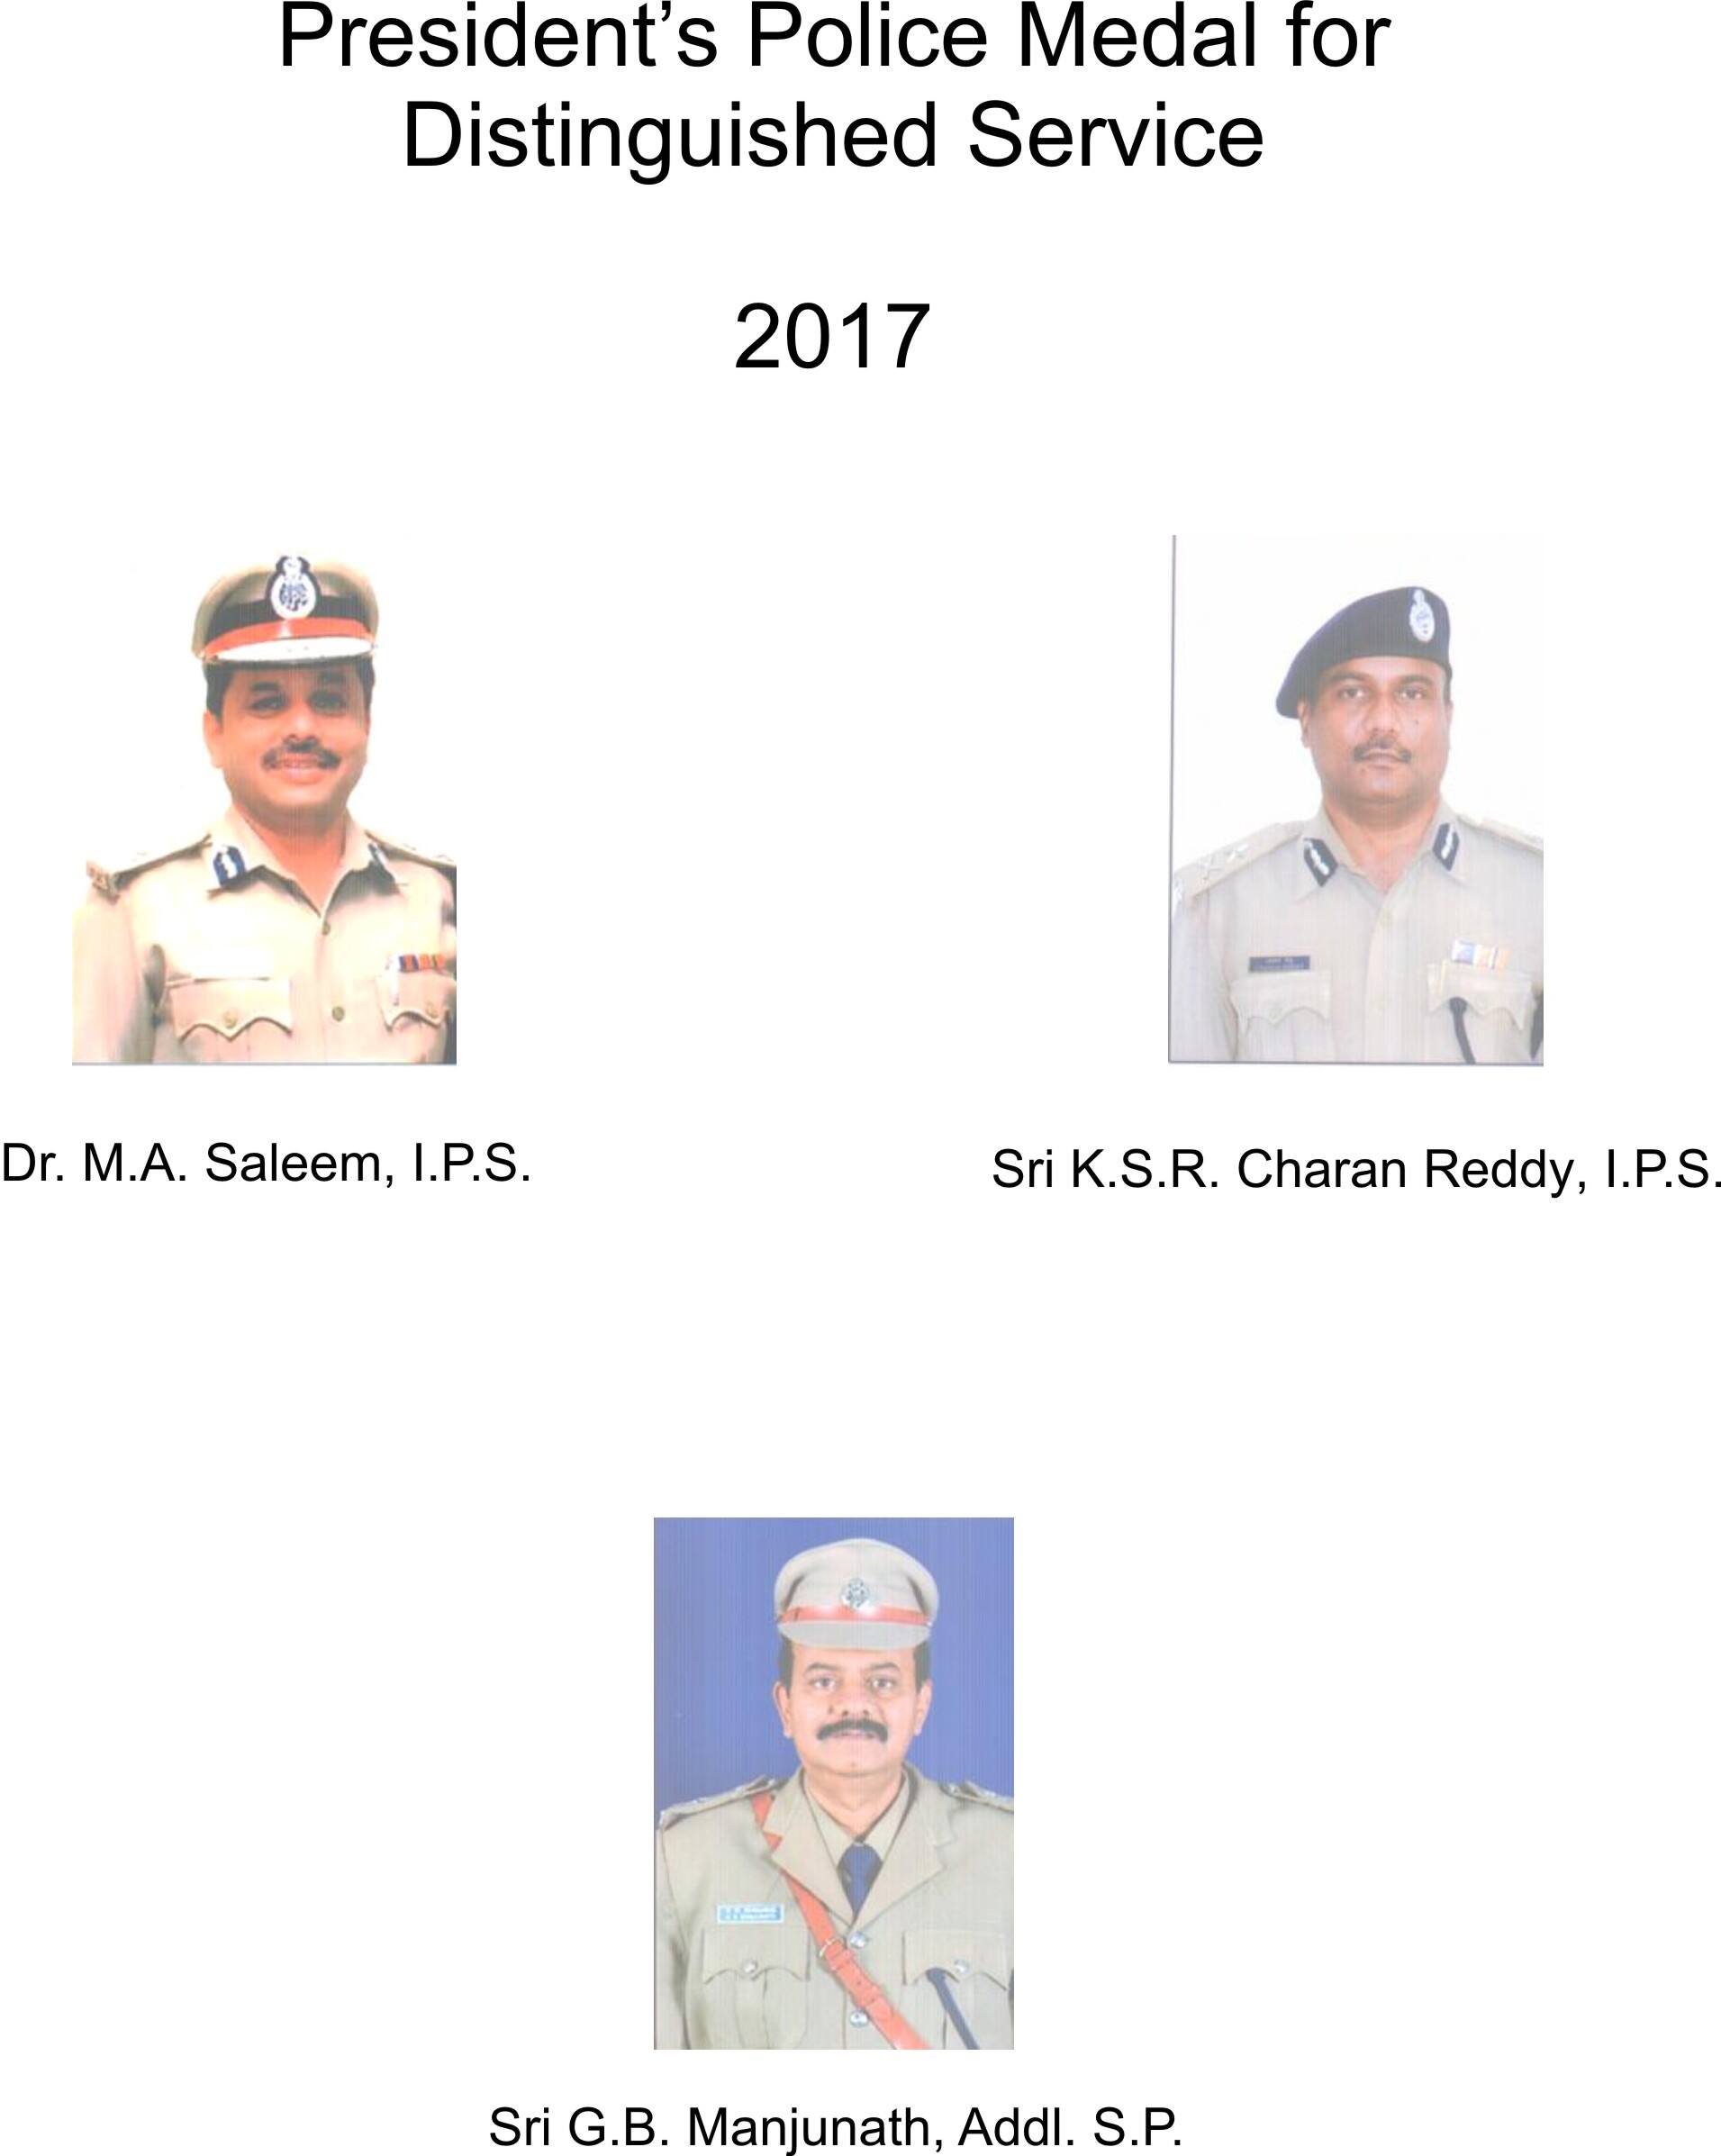 Meet the brave police officers who have made Karnataka proud